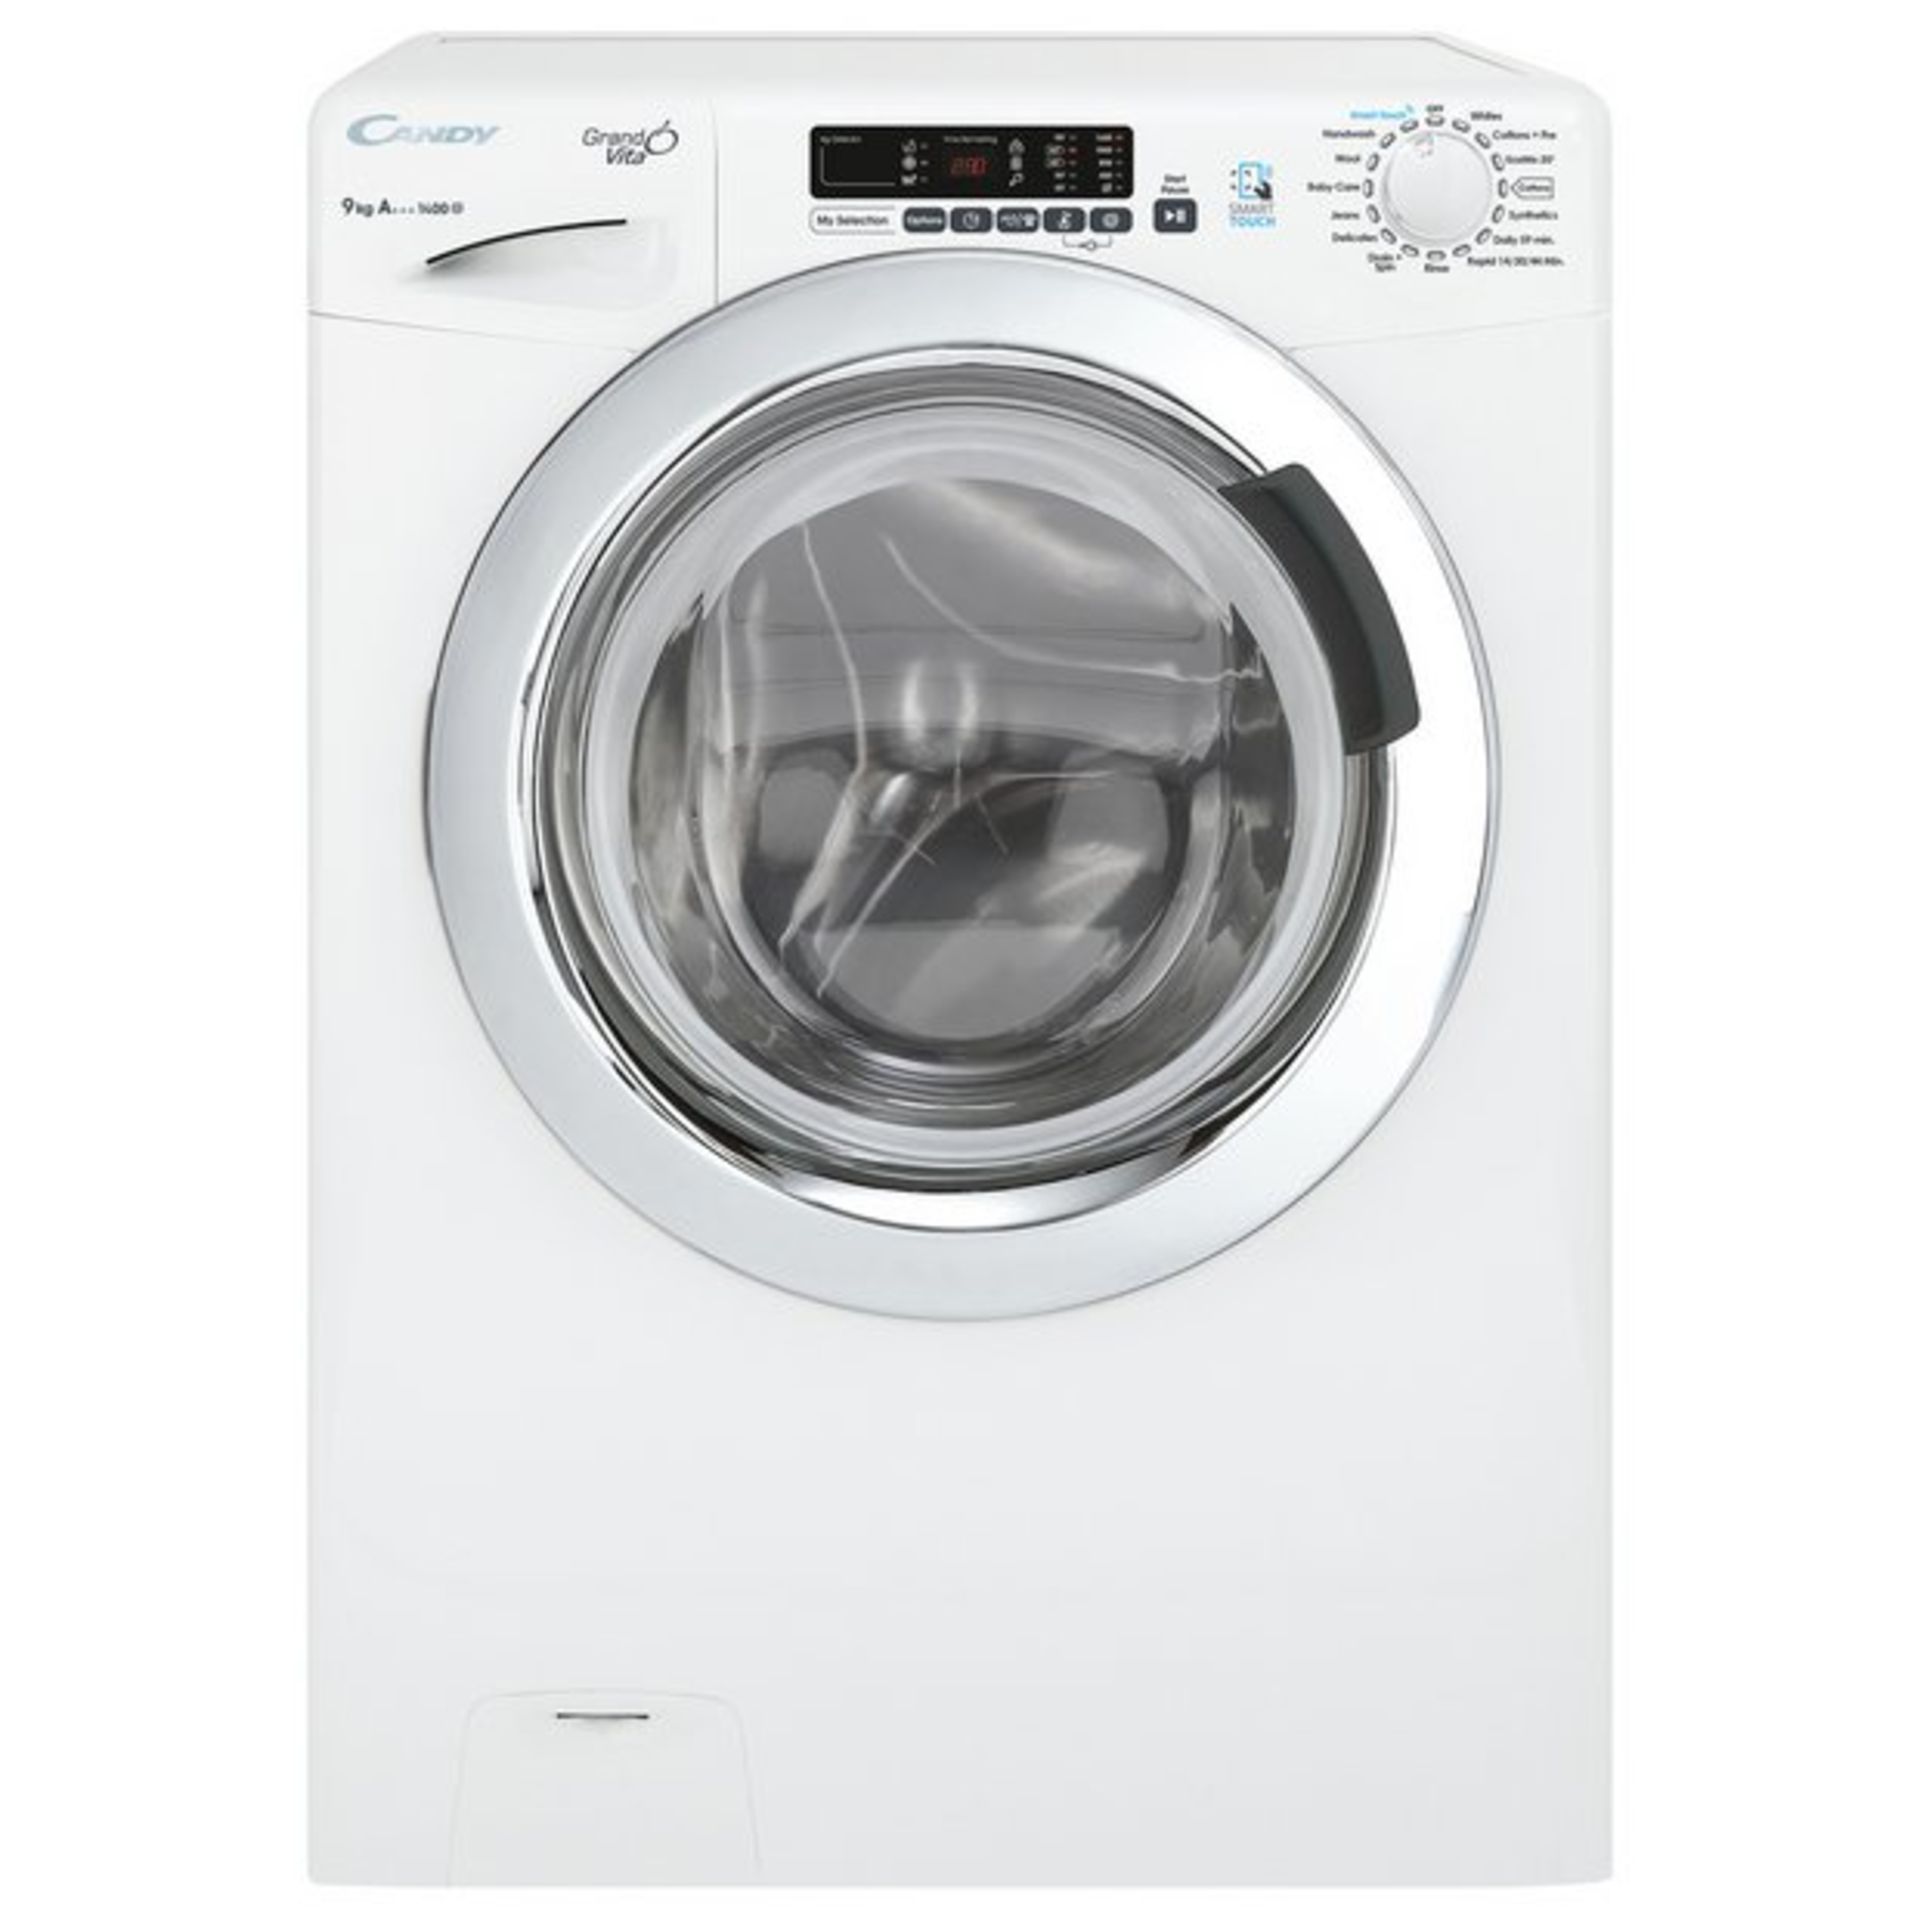 + VAT Grade A/B Candy GVS149DC3 9Kg 1400 Spin Washing Machine - A+++ Energy Rated - Intelligent